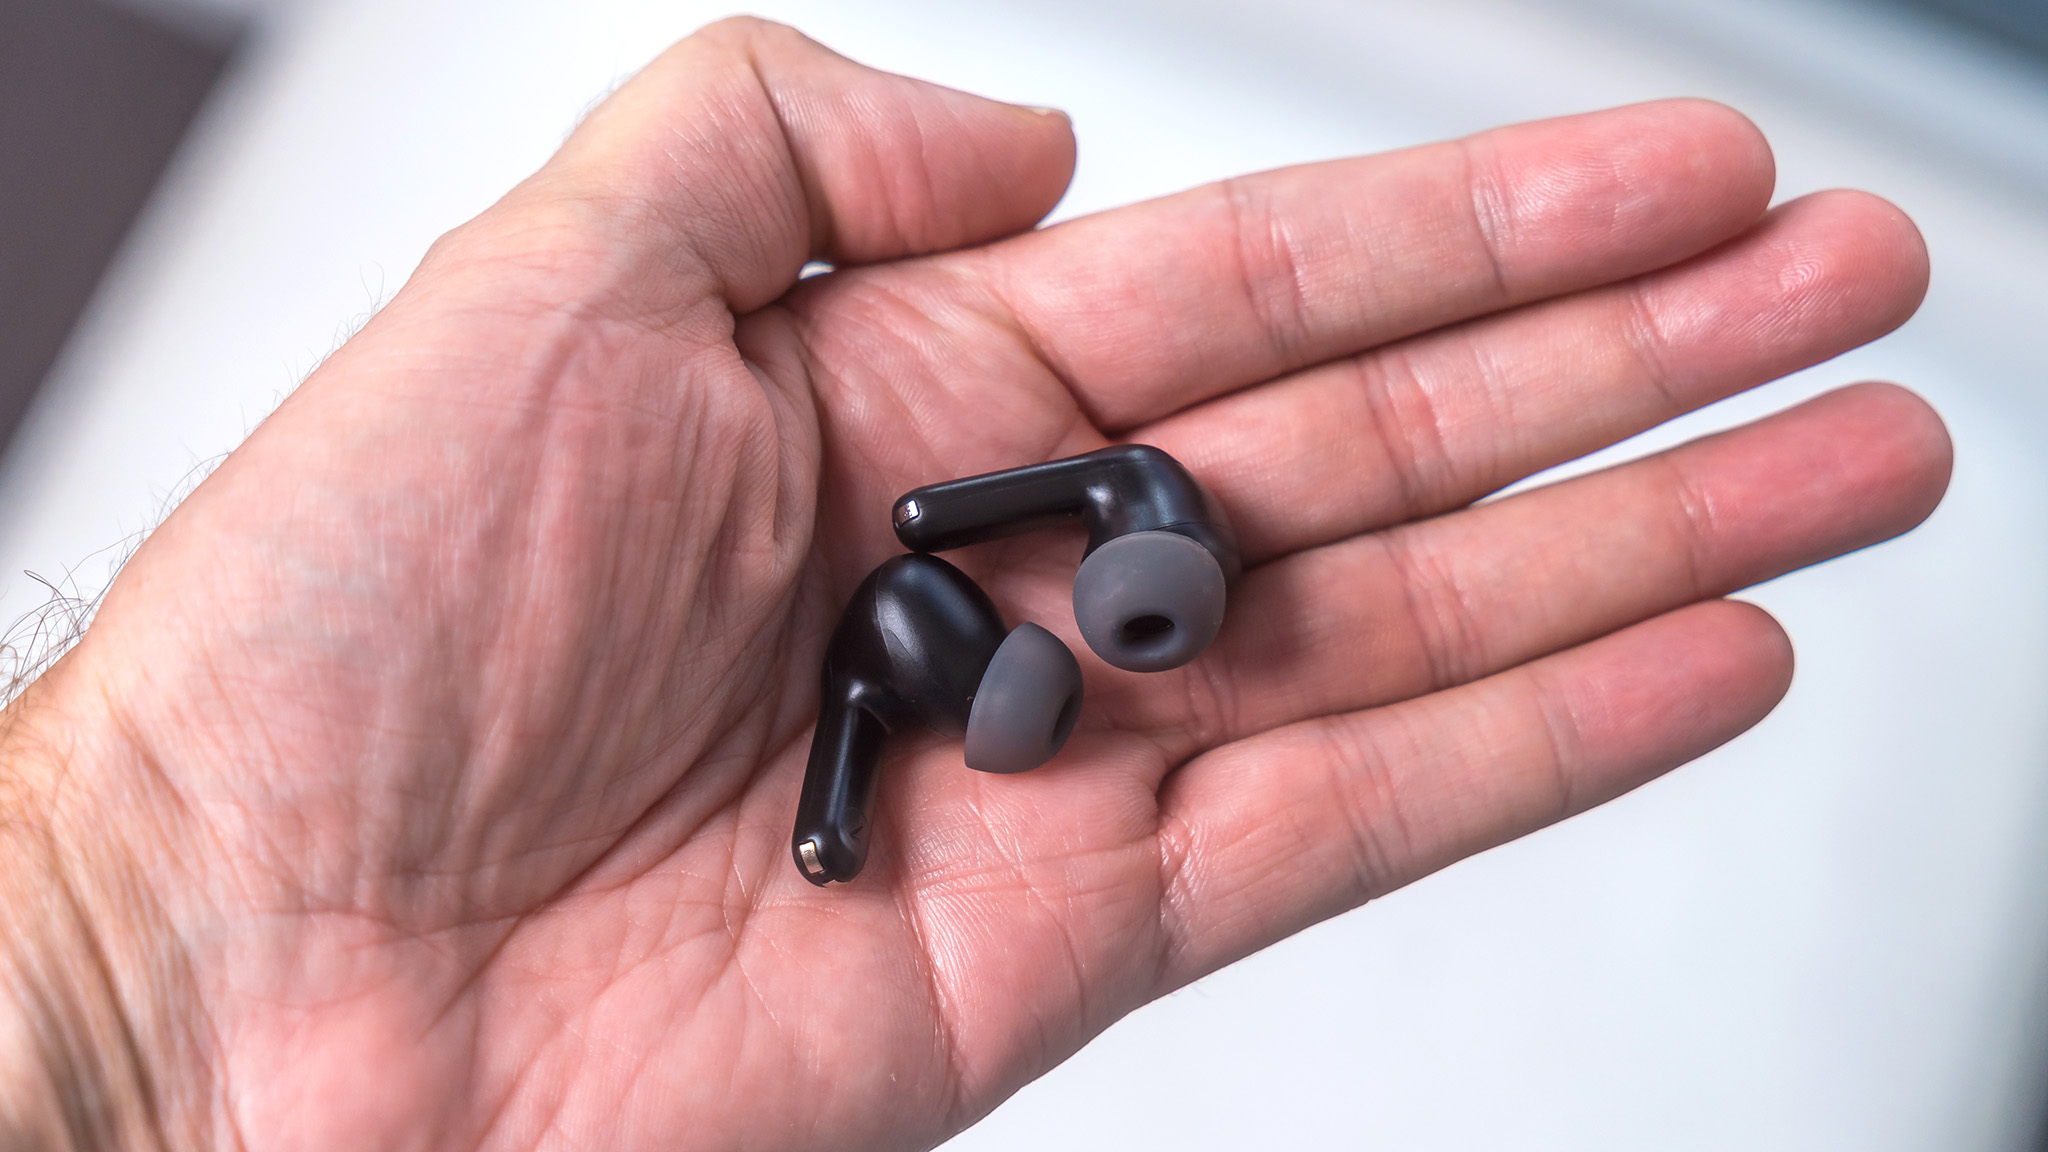 Soundpeats Air3 Pro earbuds in hand.